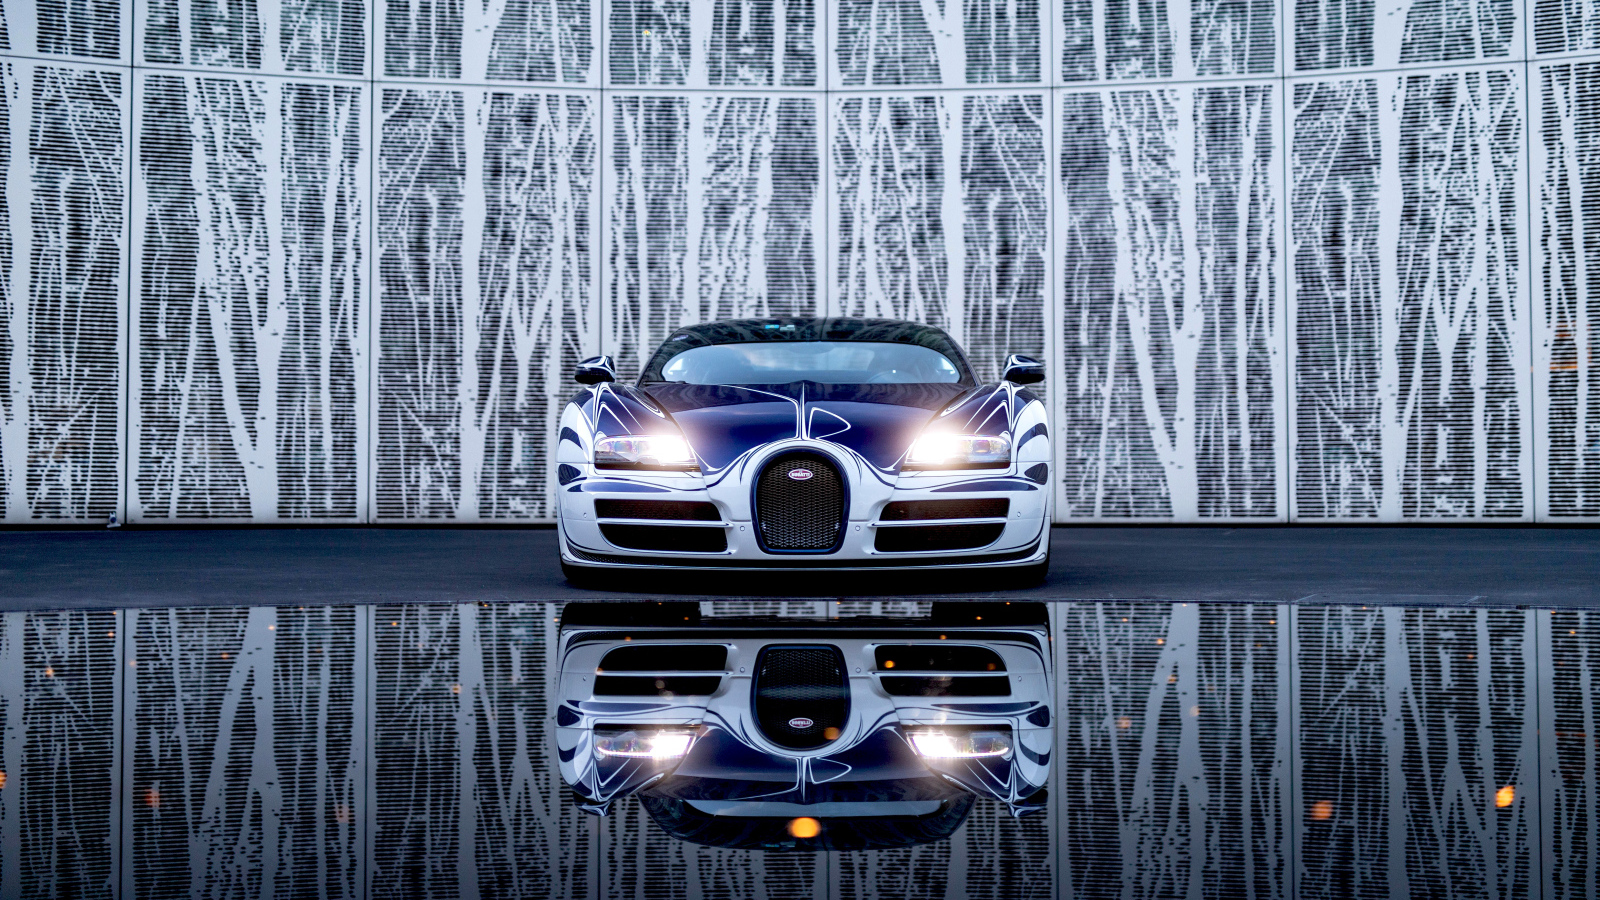 Car Bugatti Veyron Grand Sport Roadster is reflected in the mirror surface